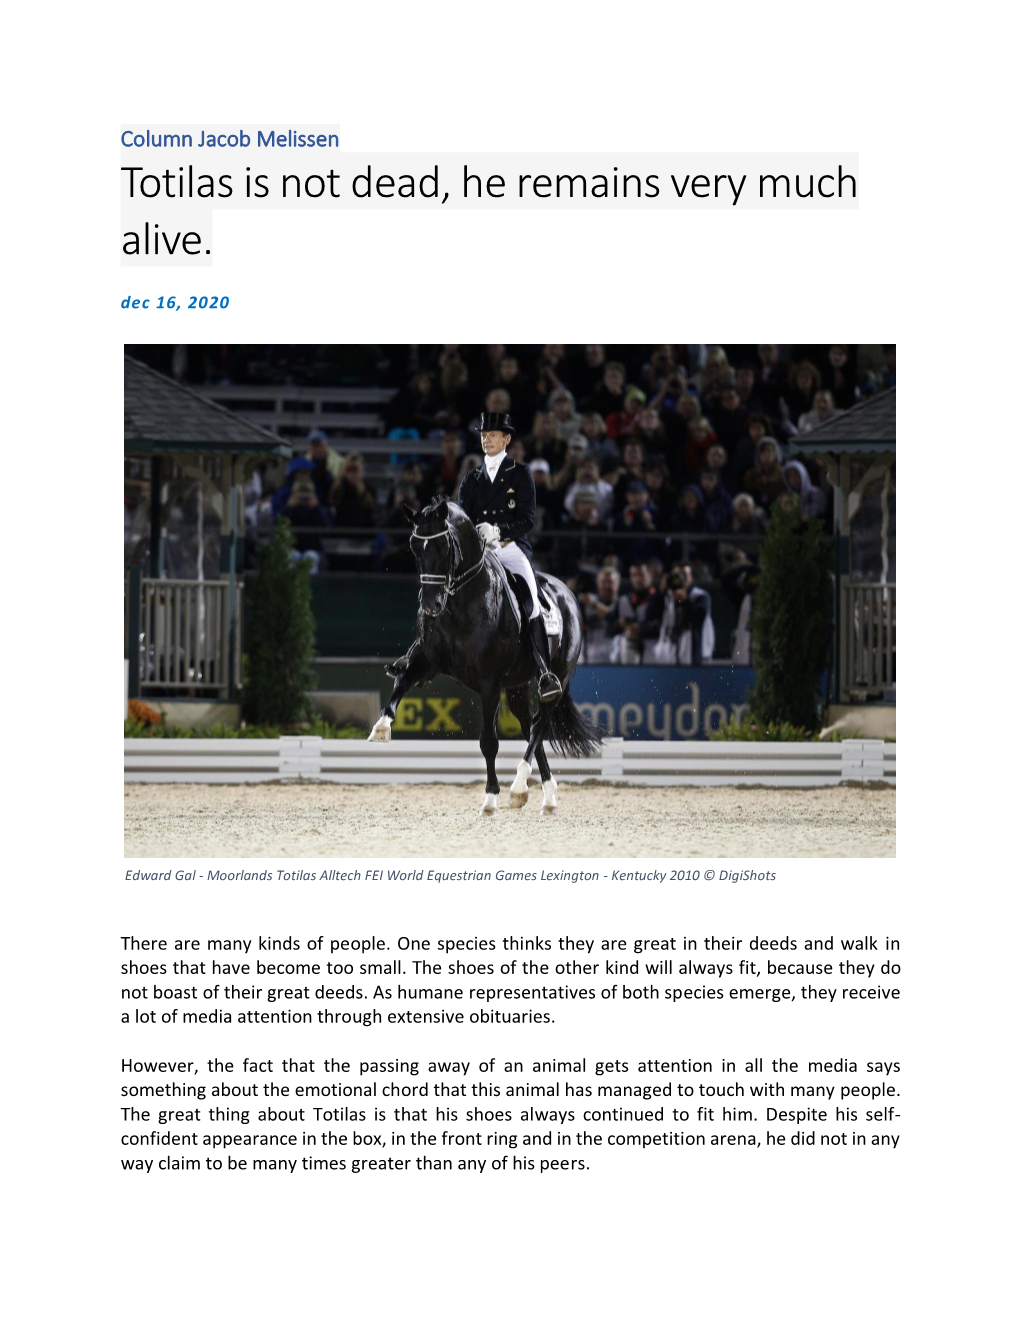 Totilas Is Not Dead, He Remains Very Much Alive. Dec 16, 2020